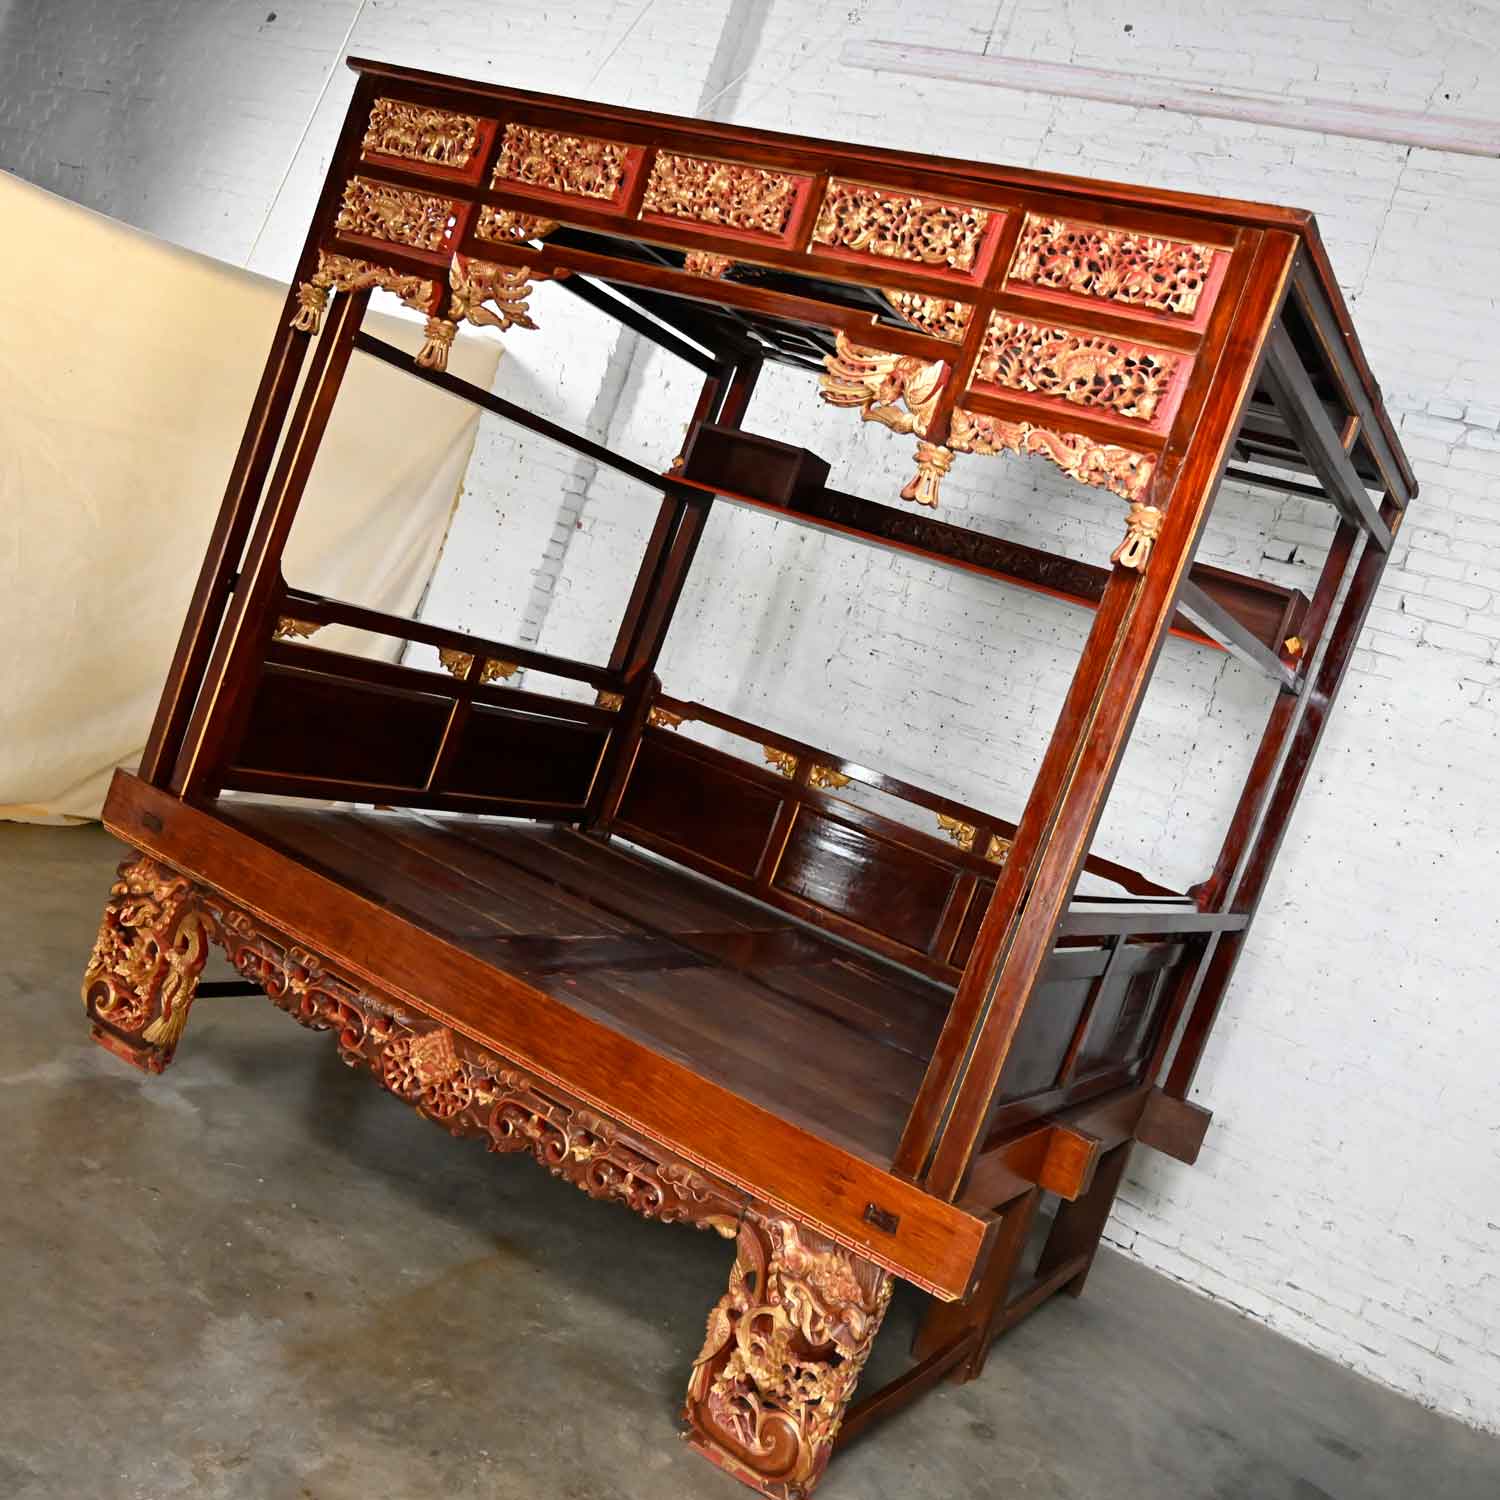 Vintage Chinoiserie Chinese Elm Wedding Opium Canopy Bed Hand Carved Asian Designs Queen Size